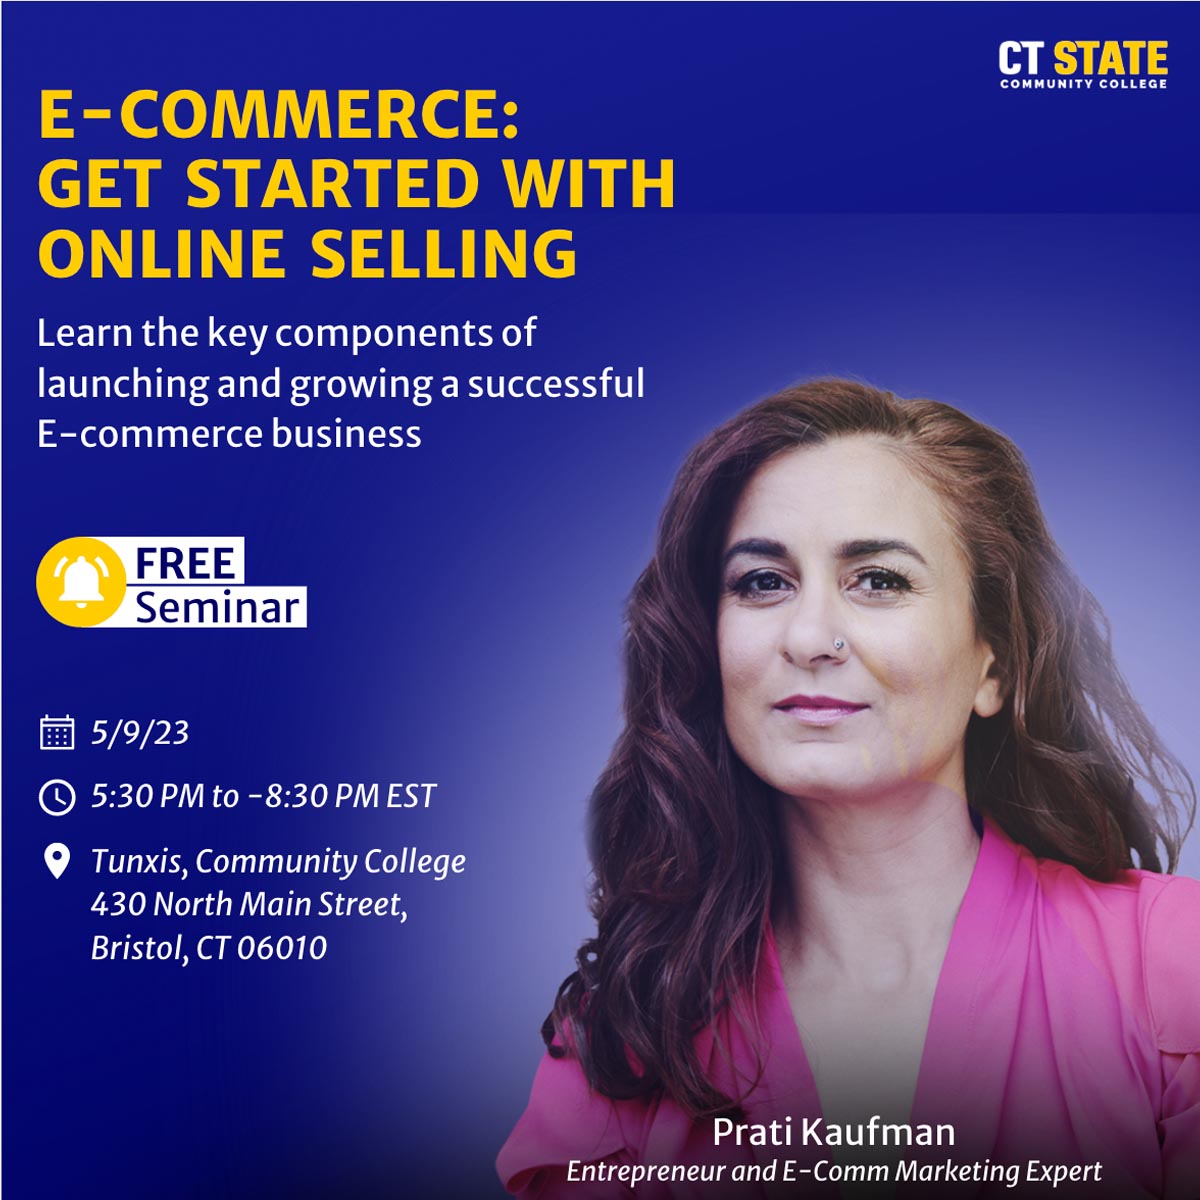 E-commerce: Get started with online selling - IN PERSON (5/9)